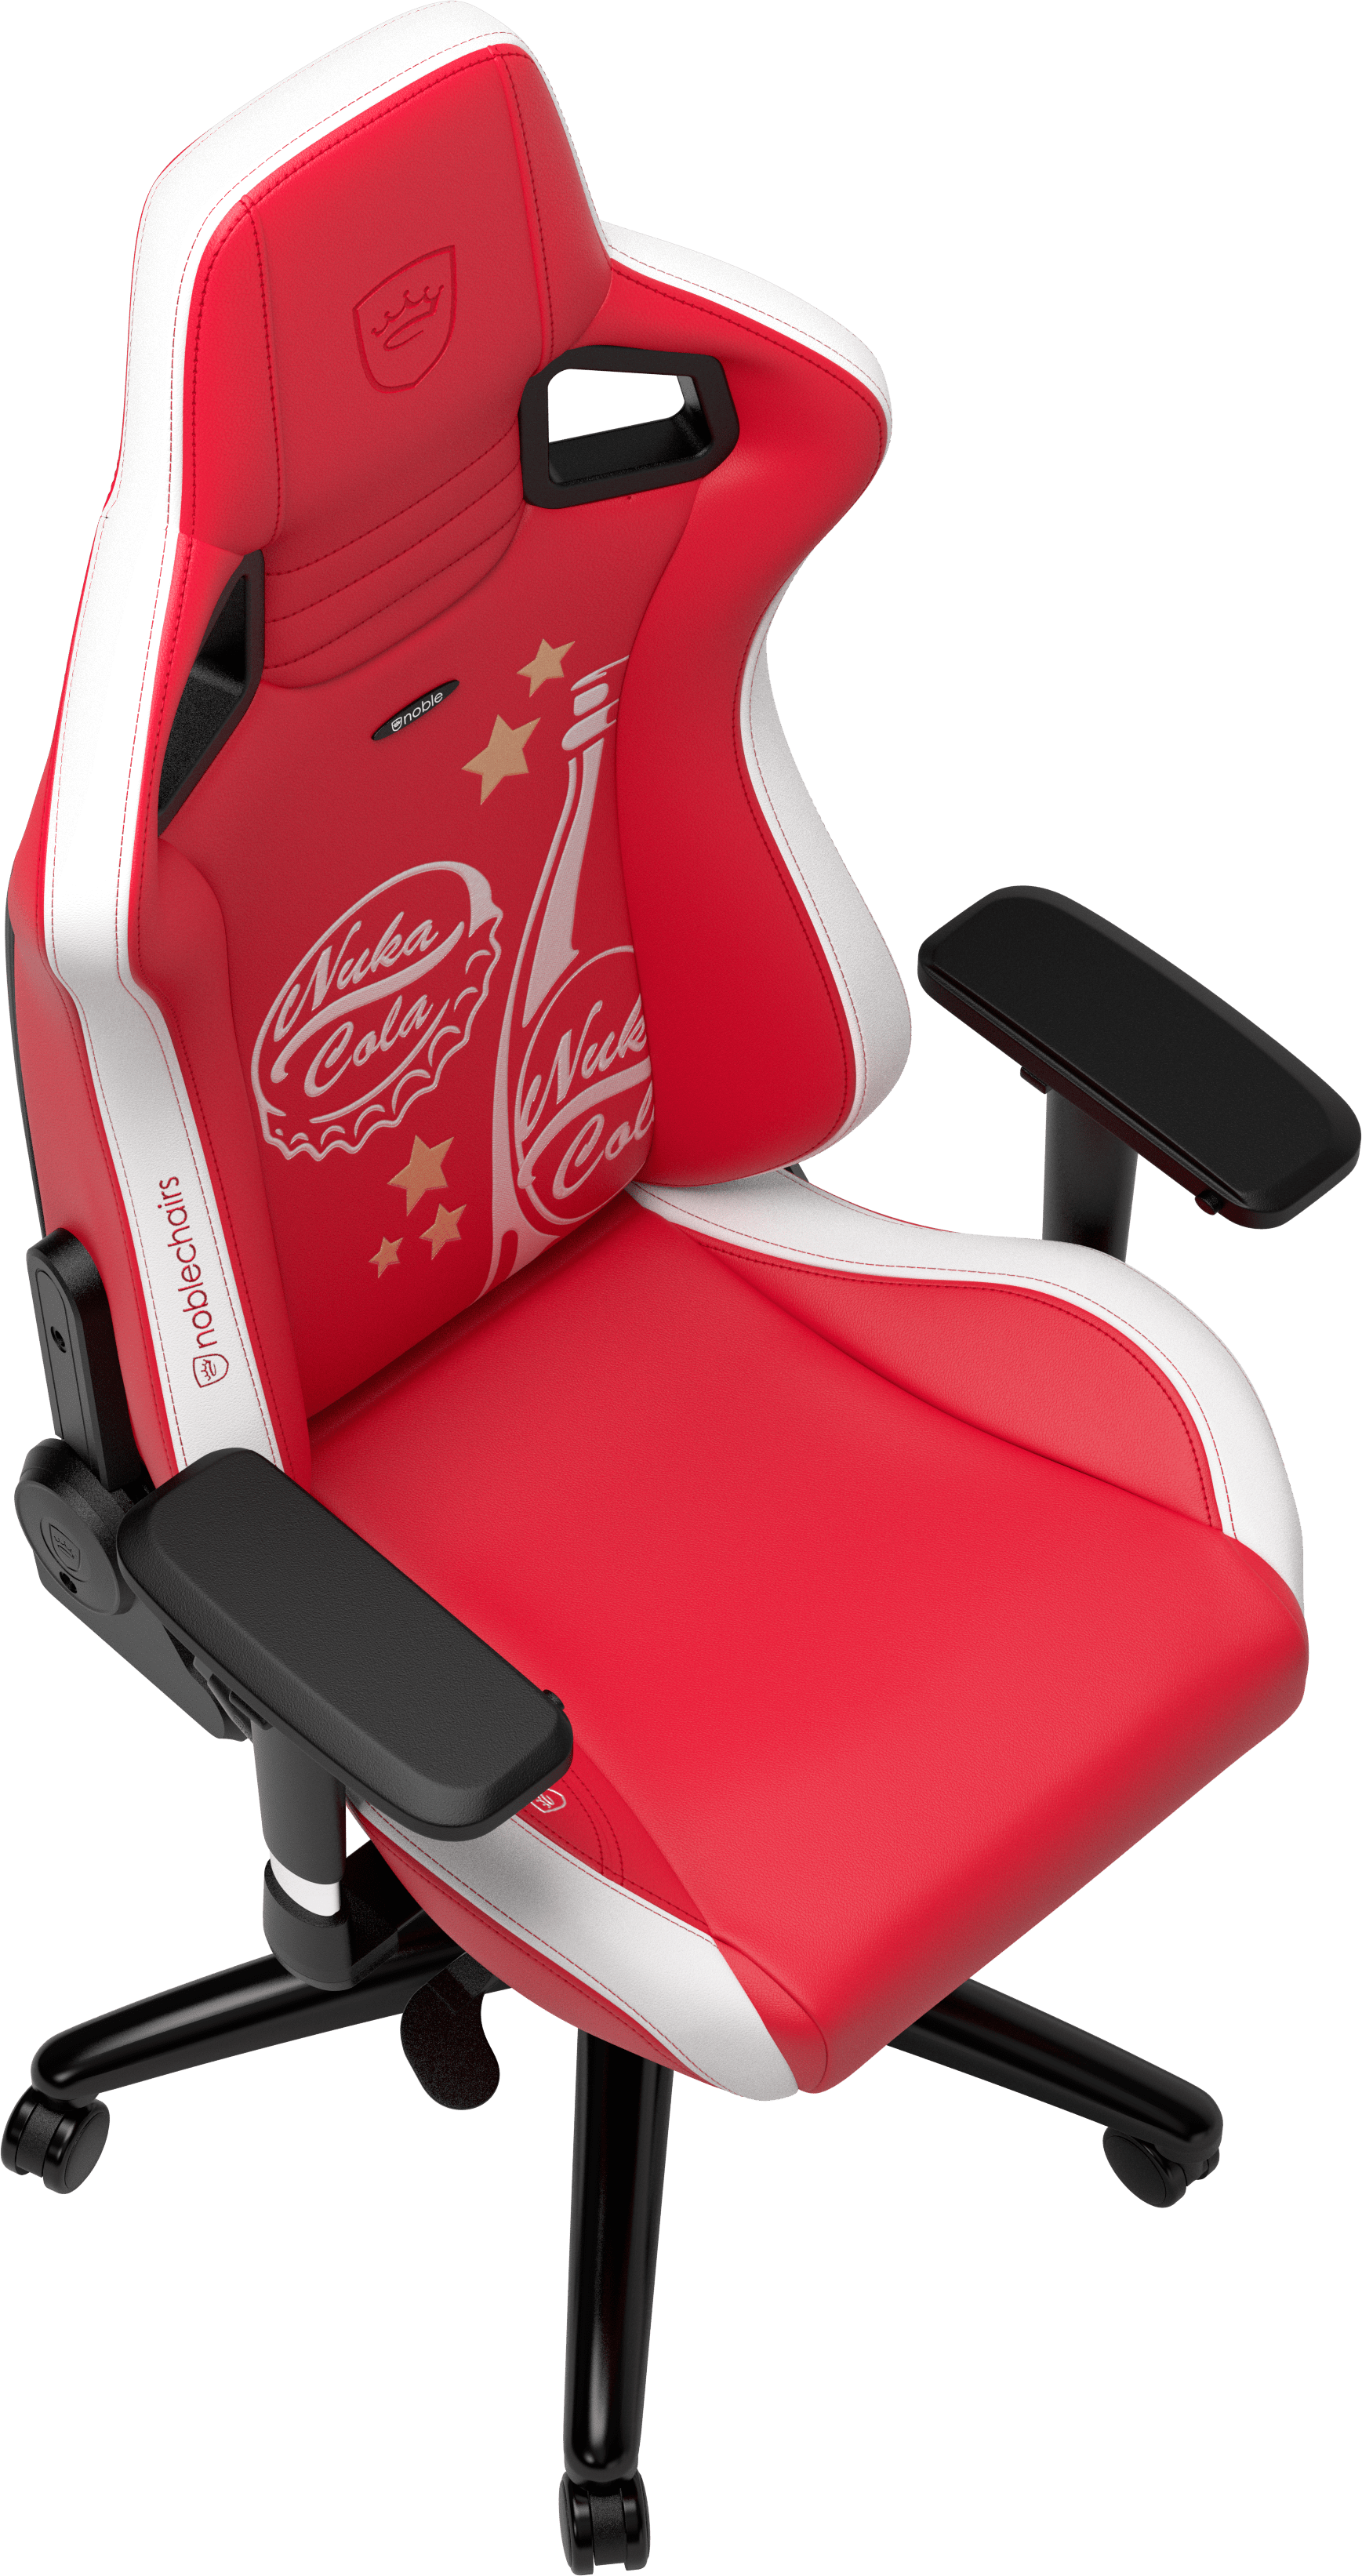 comfort noblechairs EPIC Fallout Nuka-Cola Edition